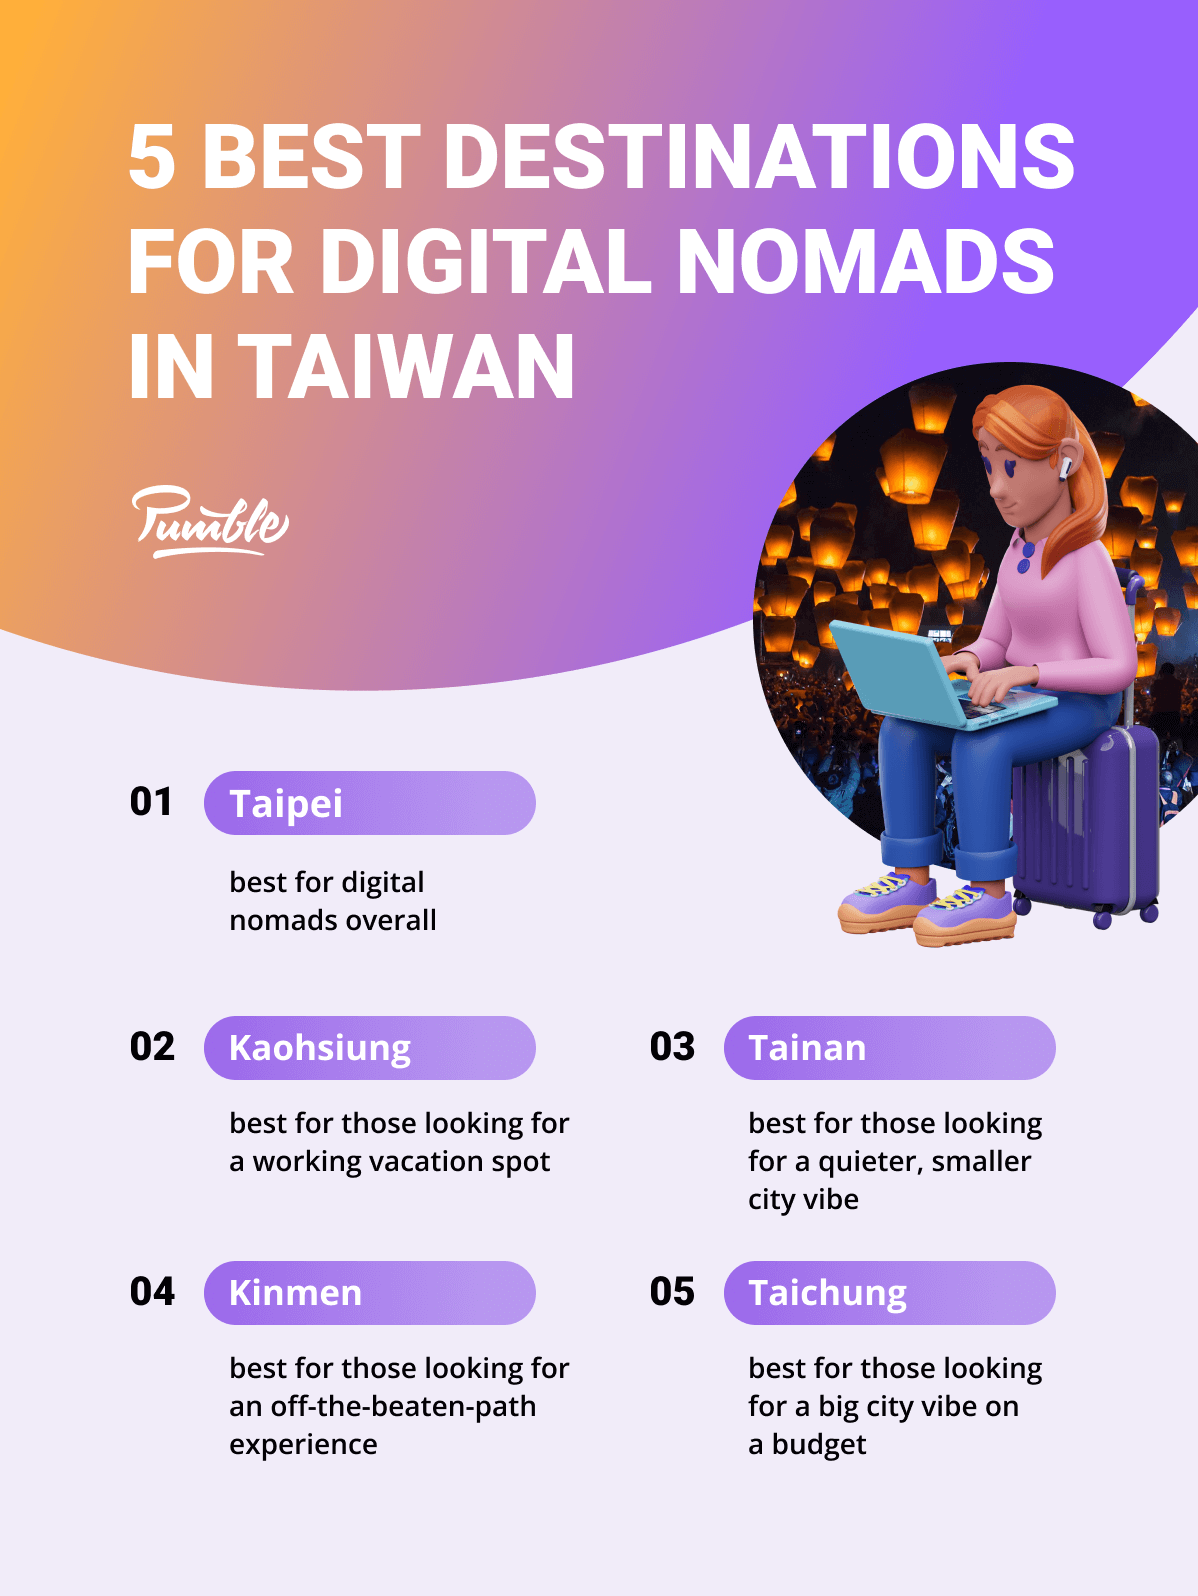 5 Best destinations for digital nomads in Taiwan